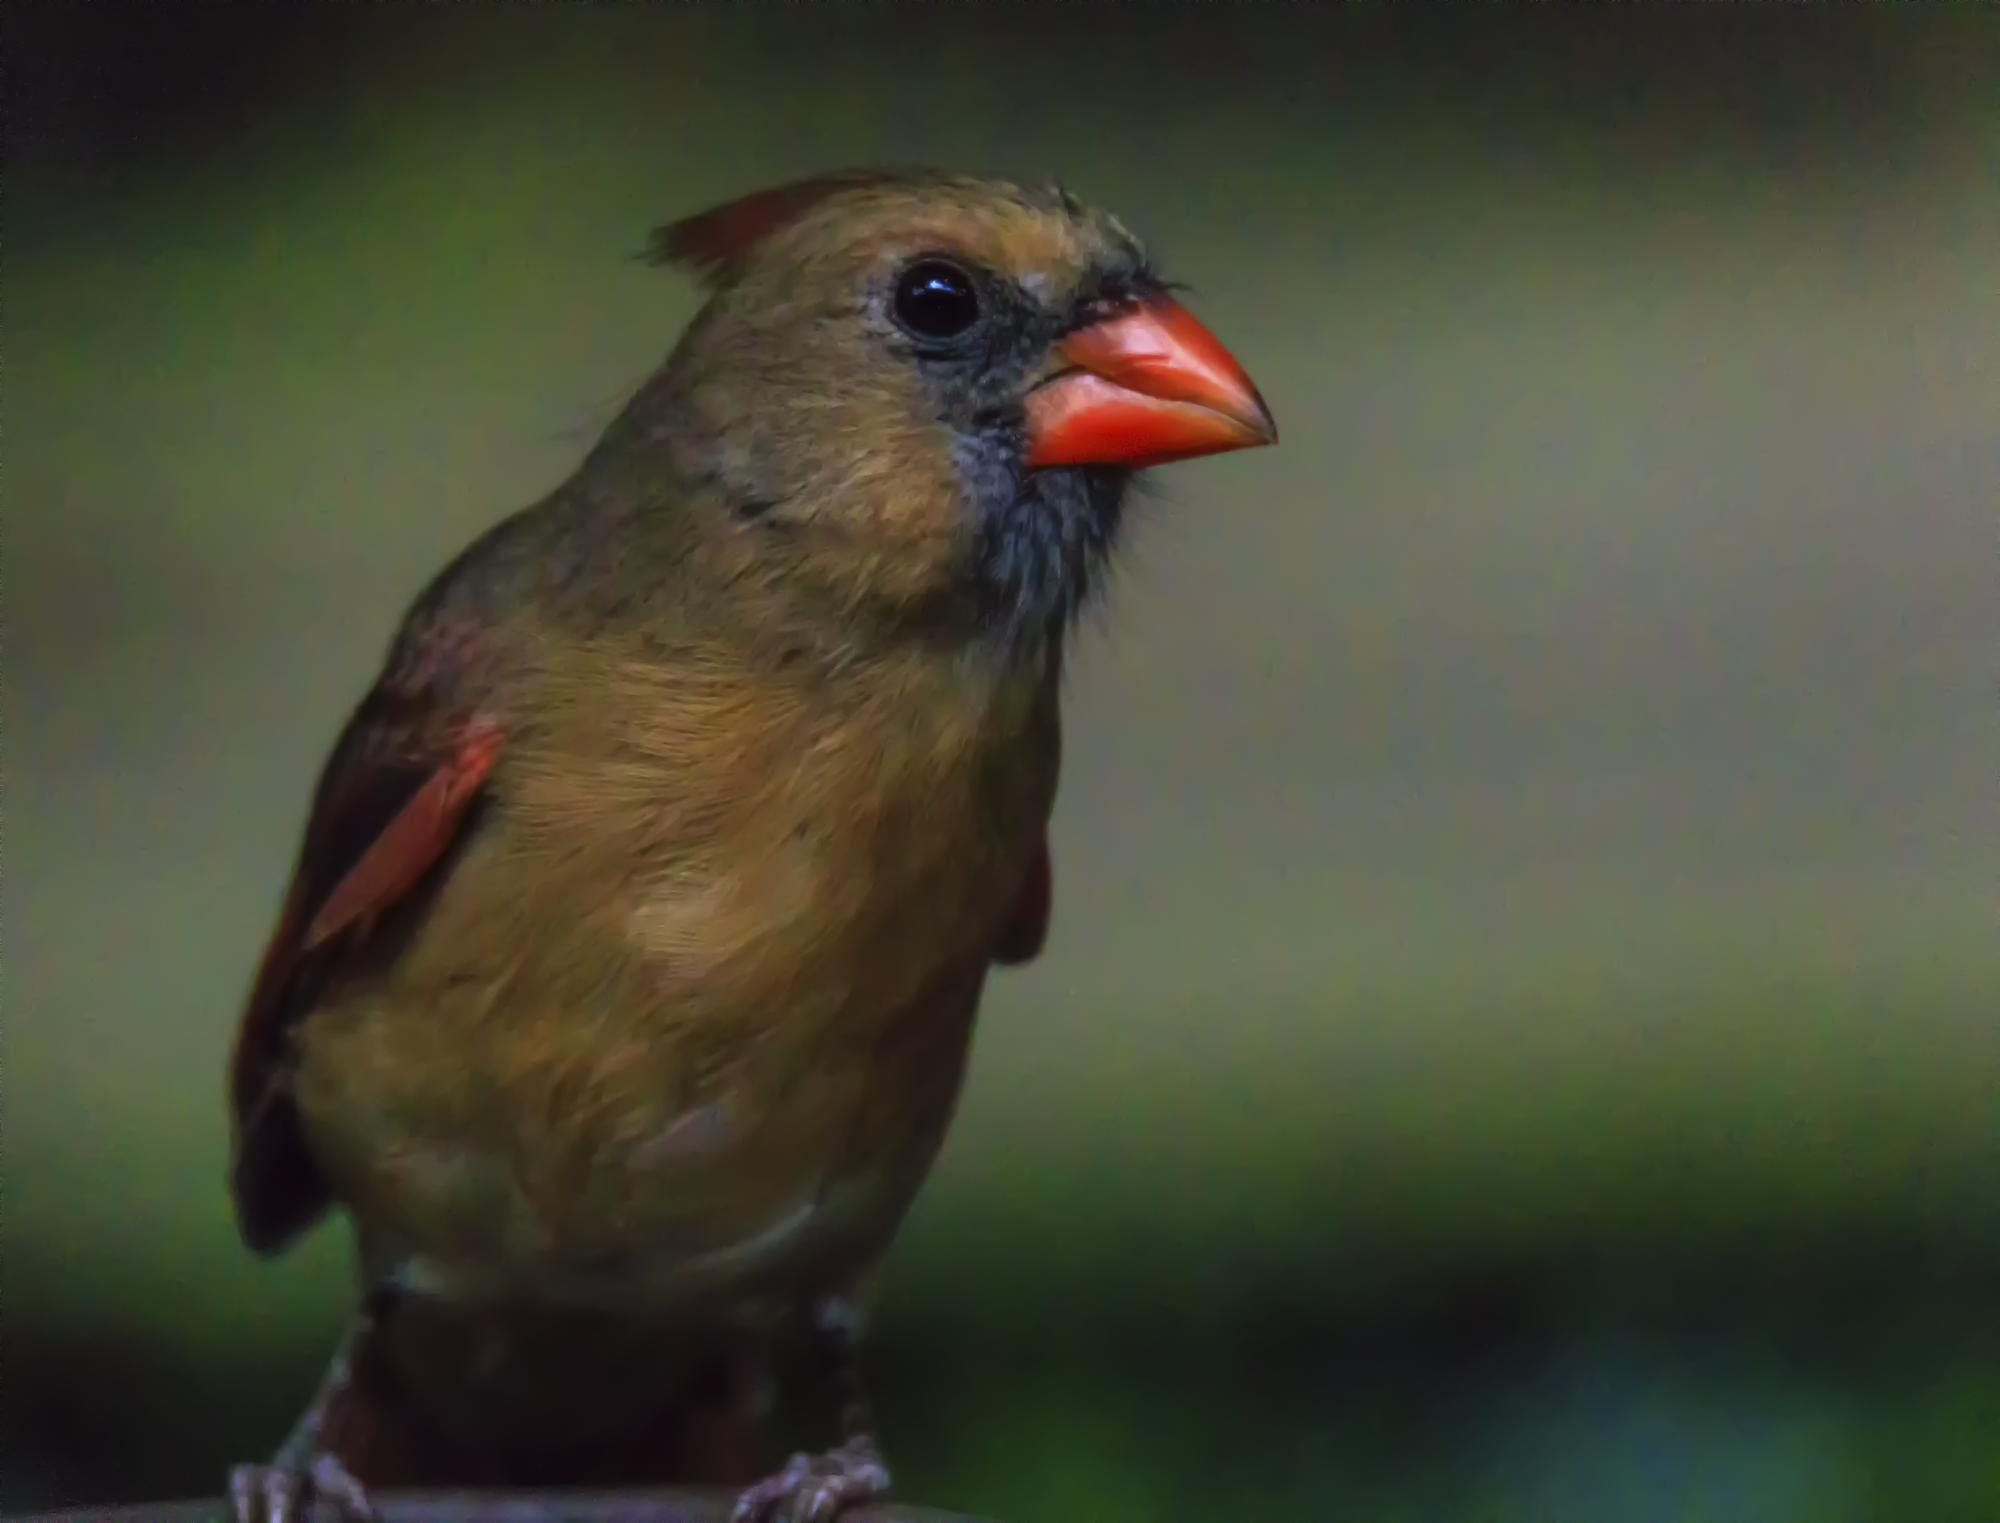 small brown bird with a red nose perched on the edge of a railing